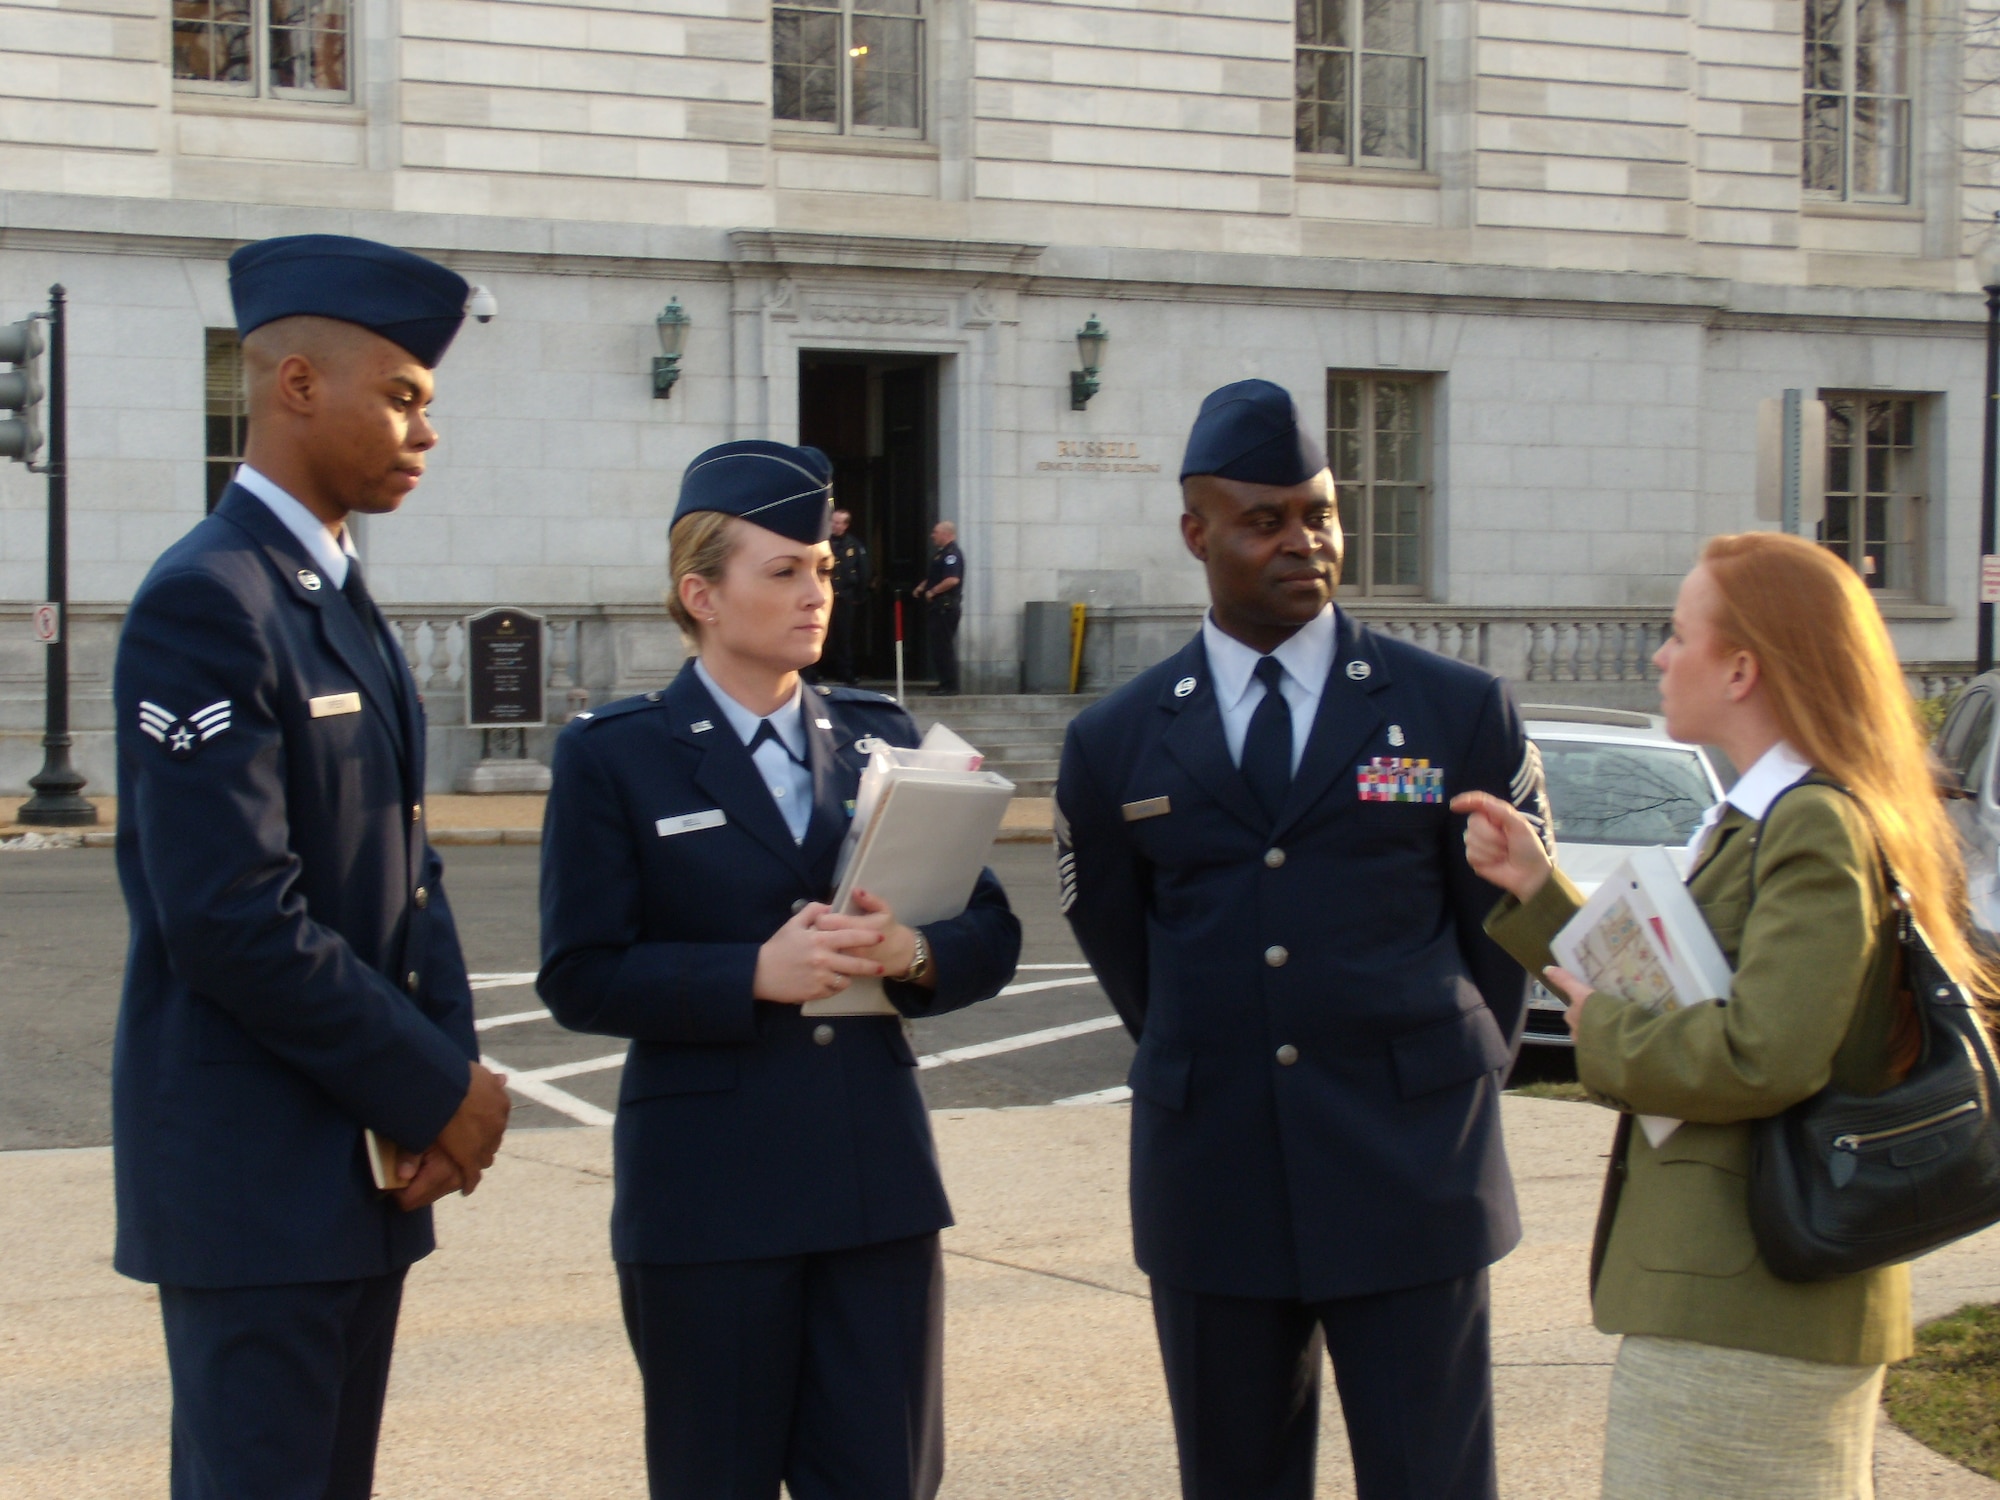 From left: Senior Airman Quinton Green, 72nd Medical Support Squadron; 1st Lt. Christina Bell, 72nd Operations Support Squadron, and 72nd Air Base Wing and installation Command Chief Master Sgt. Eric Harmon, speak with a legislative liaison during the wing’s annual trip to Washington, D.C. (Air Force photo)